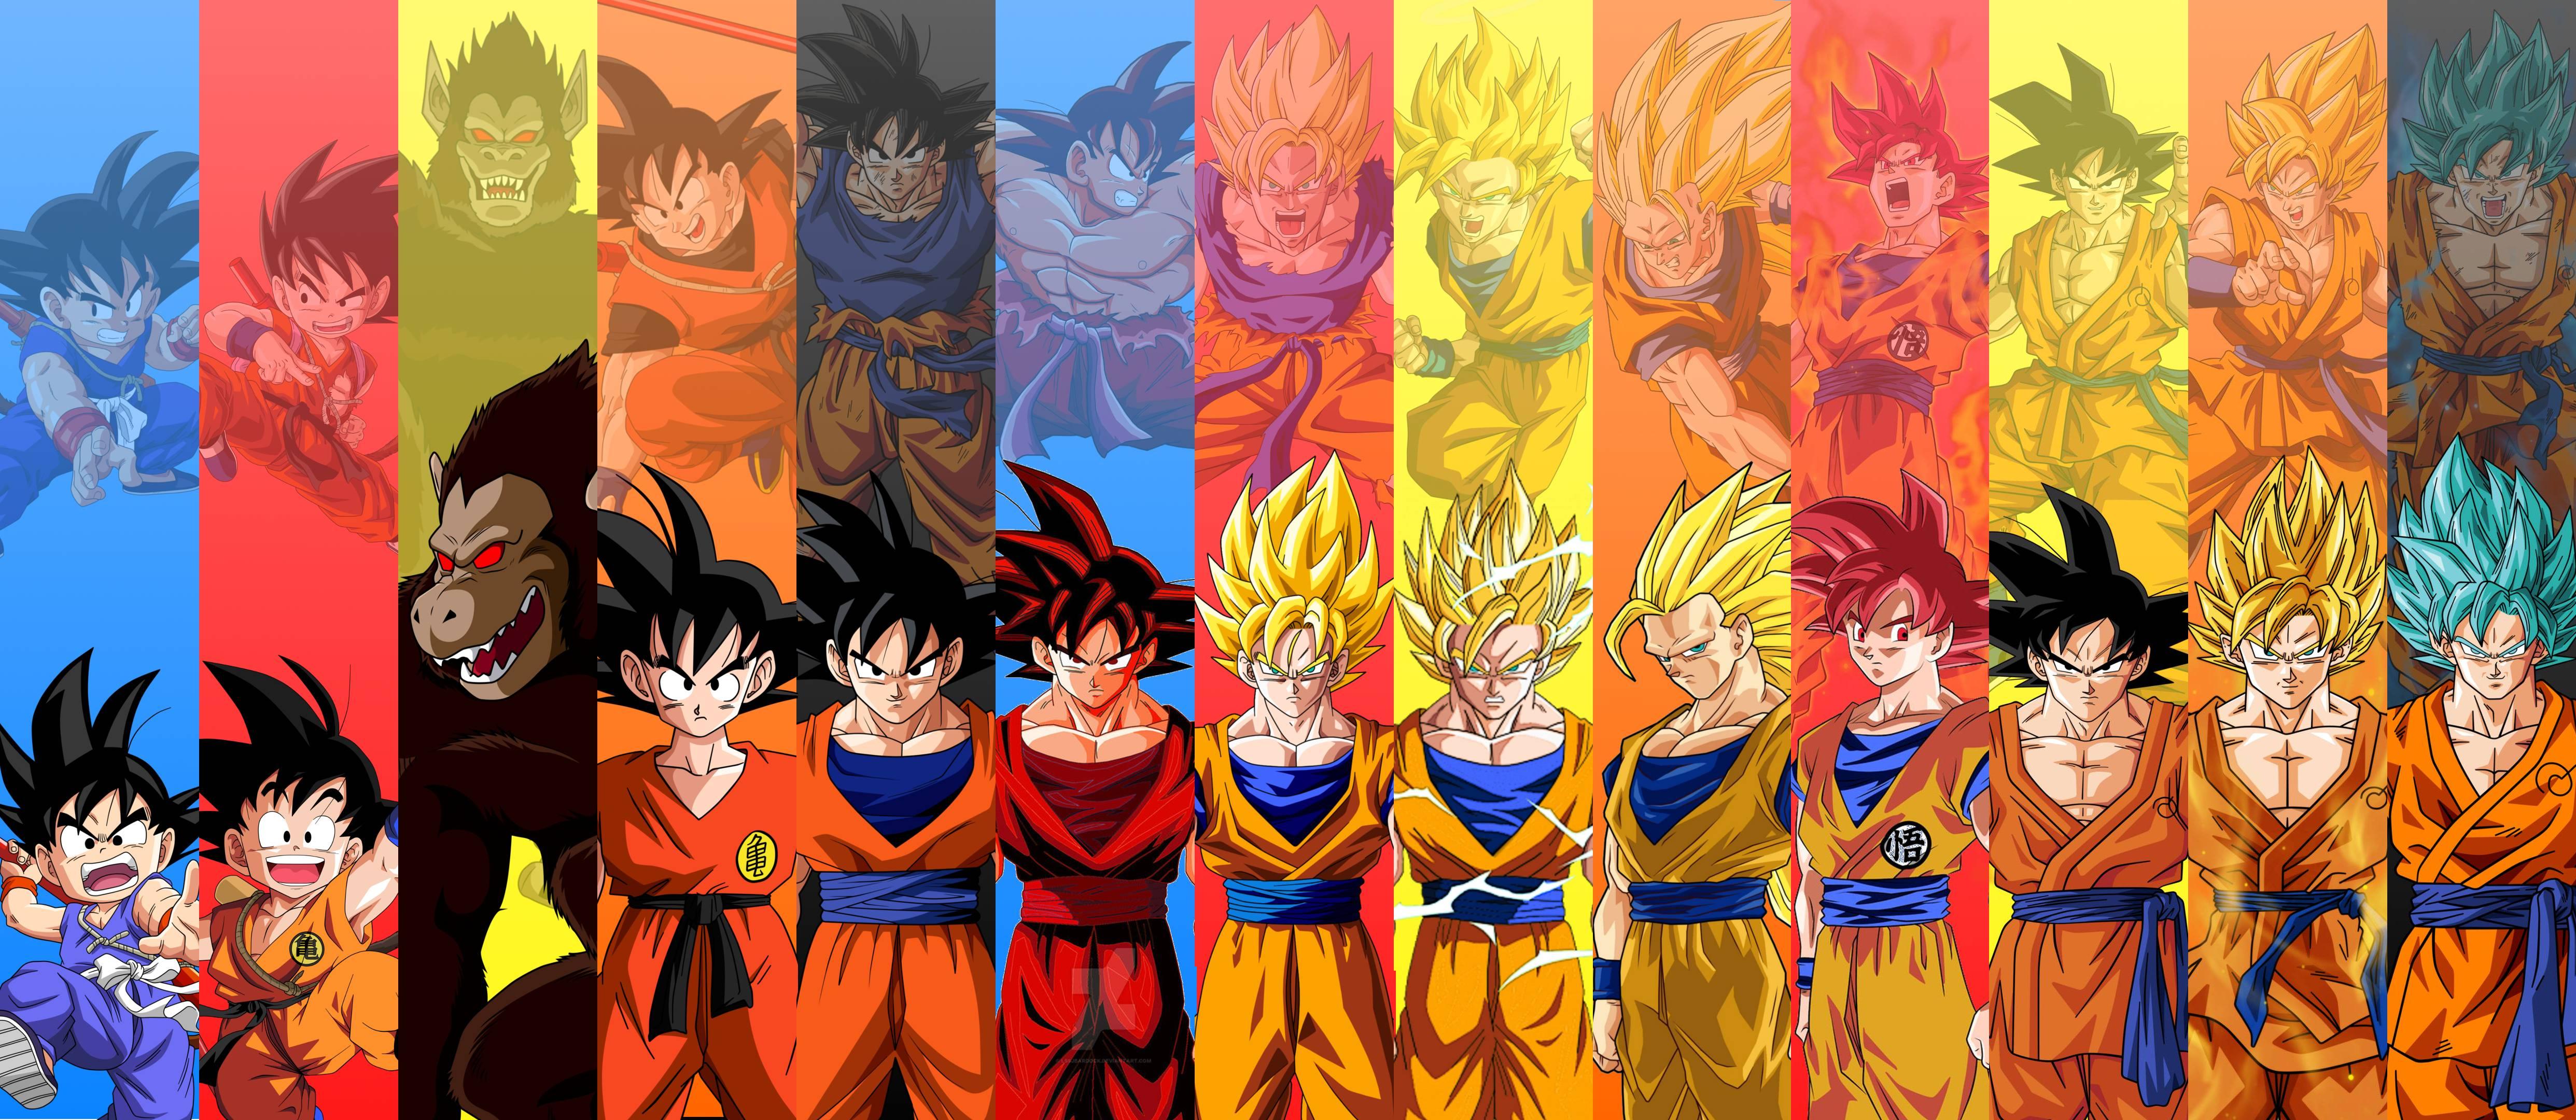 Saiyans in other universes - Dragon Ball Forum - Neoseeker Forums